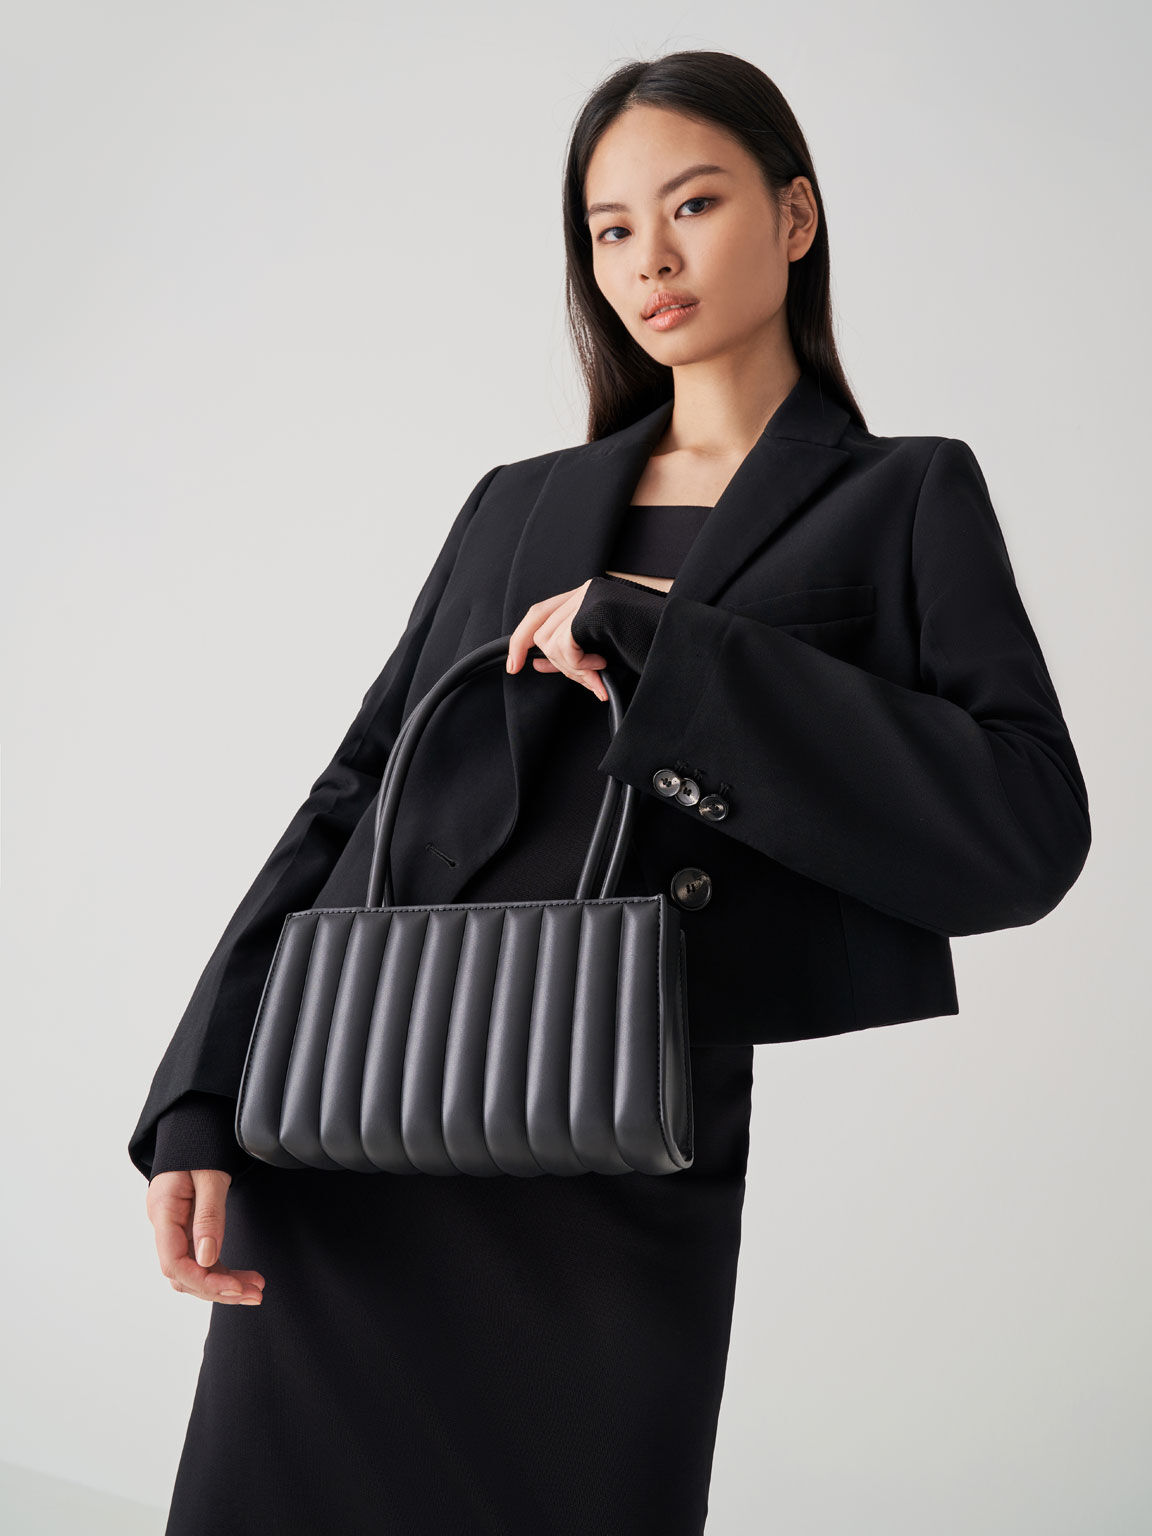 Pleated Double Handle Tote Bag - Black